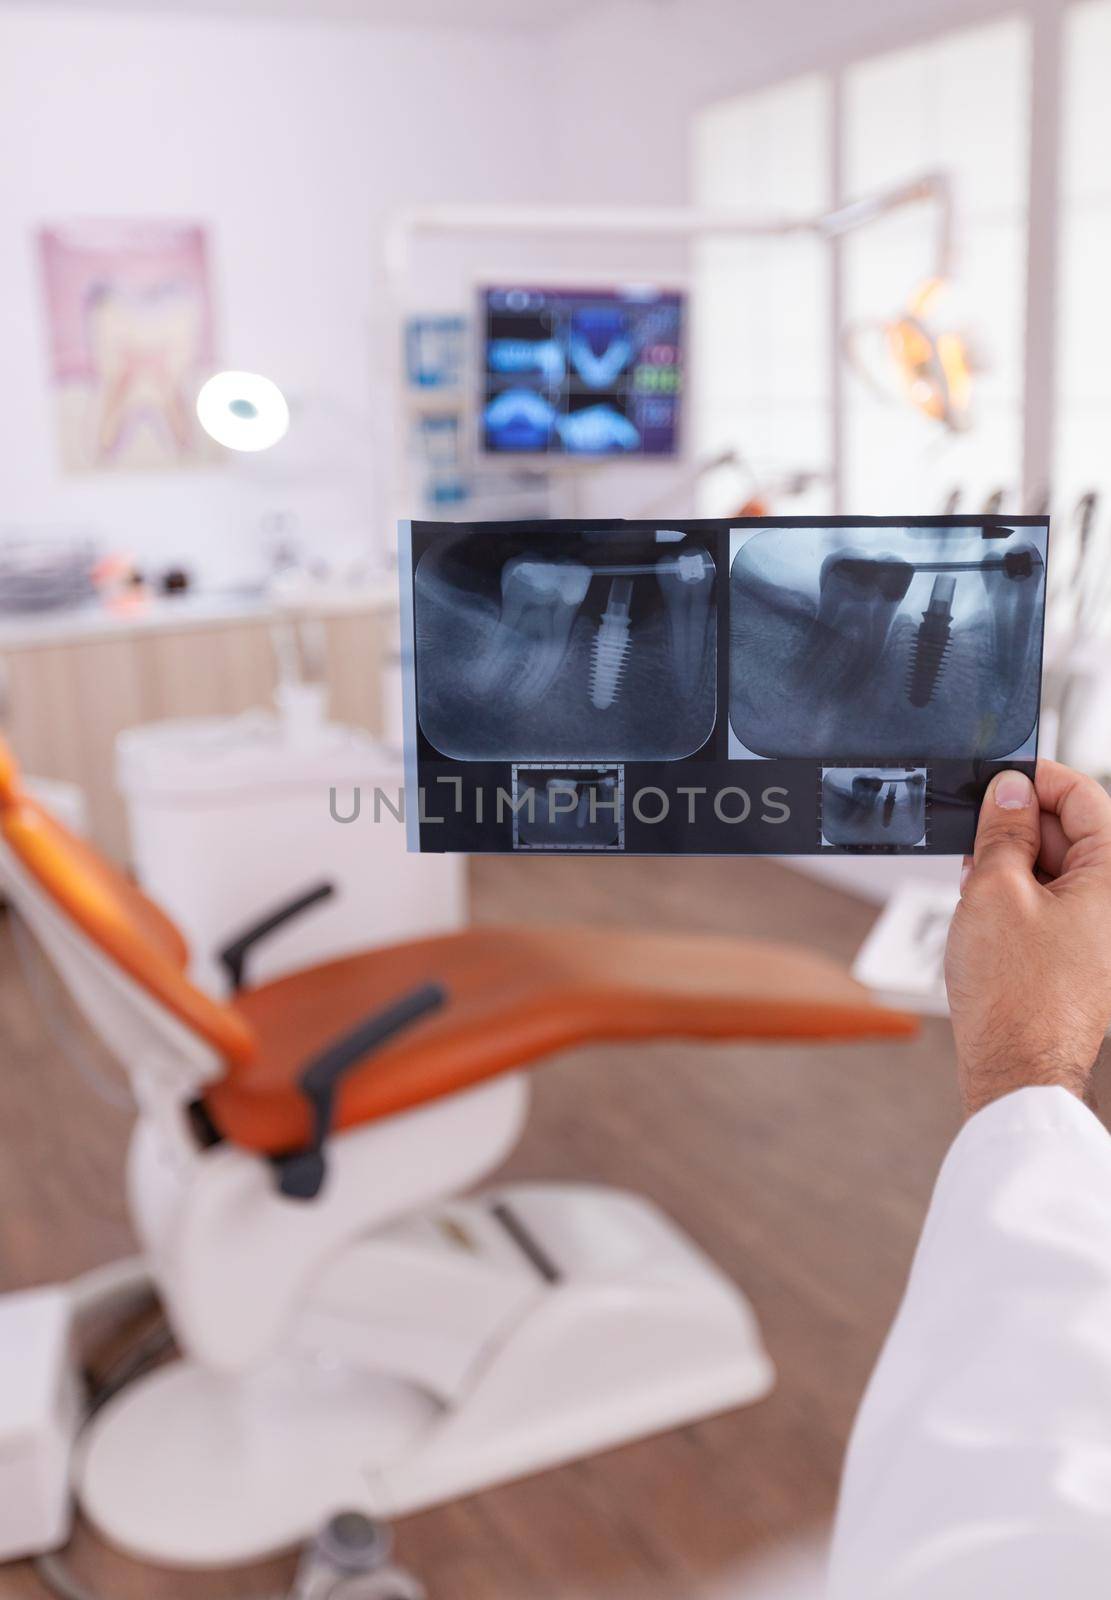 Orthodontist radiologist holding medical tooth radiography in hands analyzing dentistry surgery expertise. Specialist doctor working in stomatology dental orthodontic hospital office room